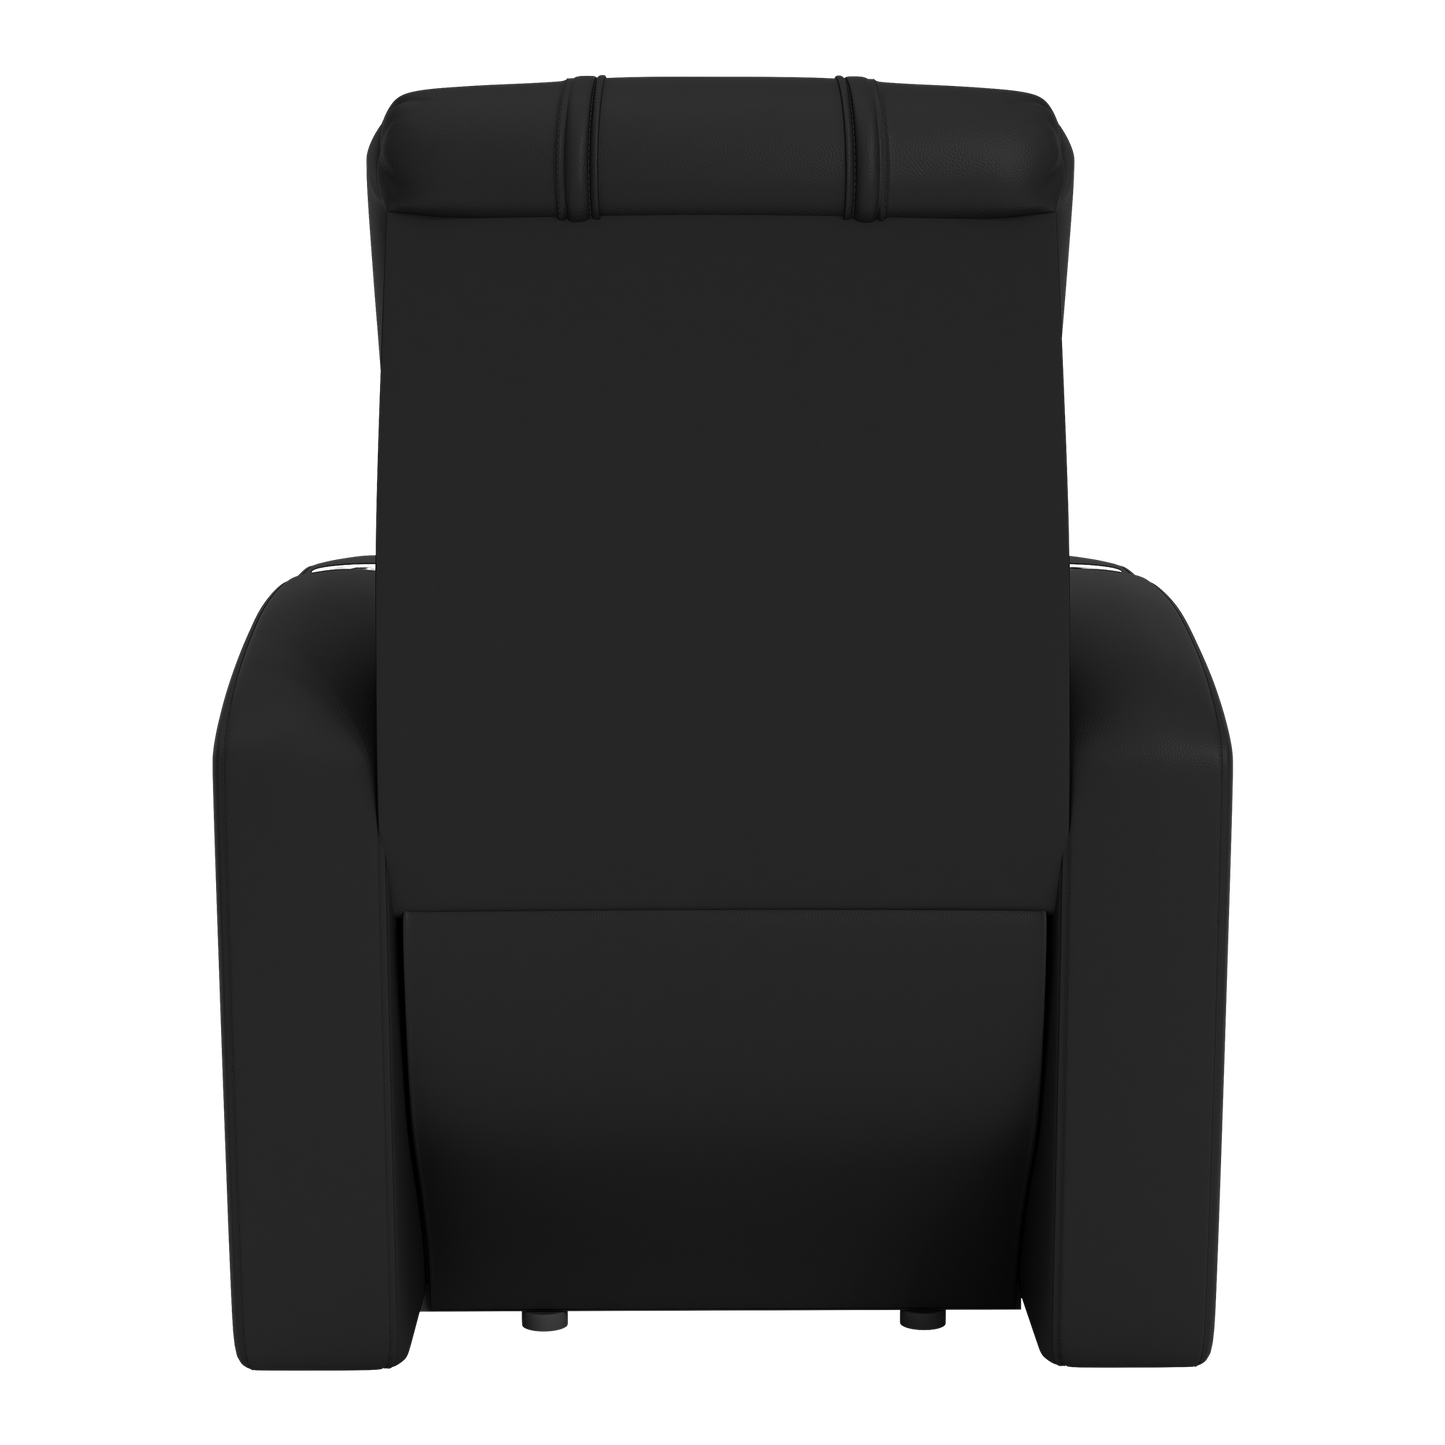 Stealth Recliner with Philadelphia Phillies Secondary